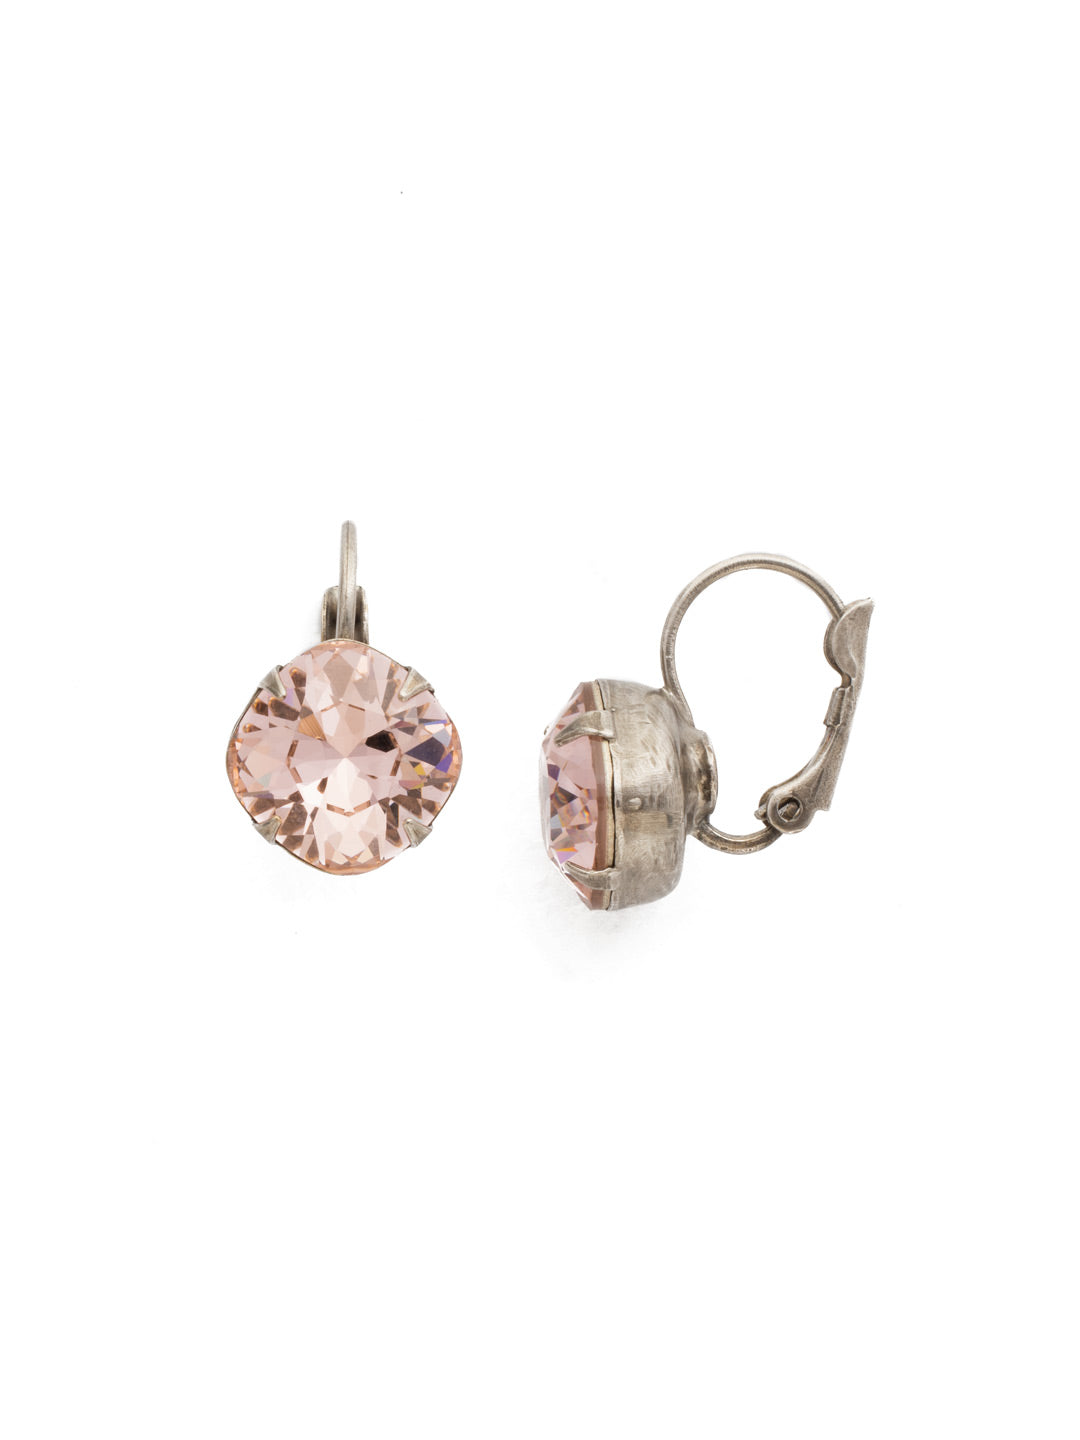 Cushion-Cut Dangle Earrings - EDL12ASVIN - <p>A simple, yet stunning earring featuring a cushion cut crystal that will never go out of style. From Sorrelli's Vintage Rose collection in our Antique Silver-tone finish.</p>